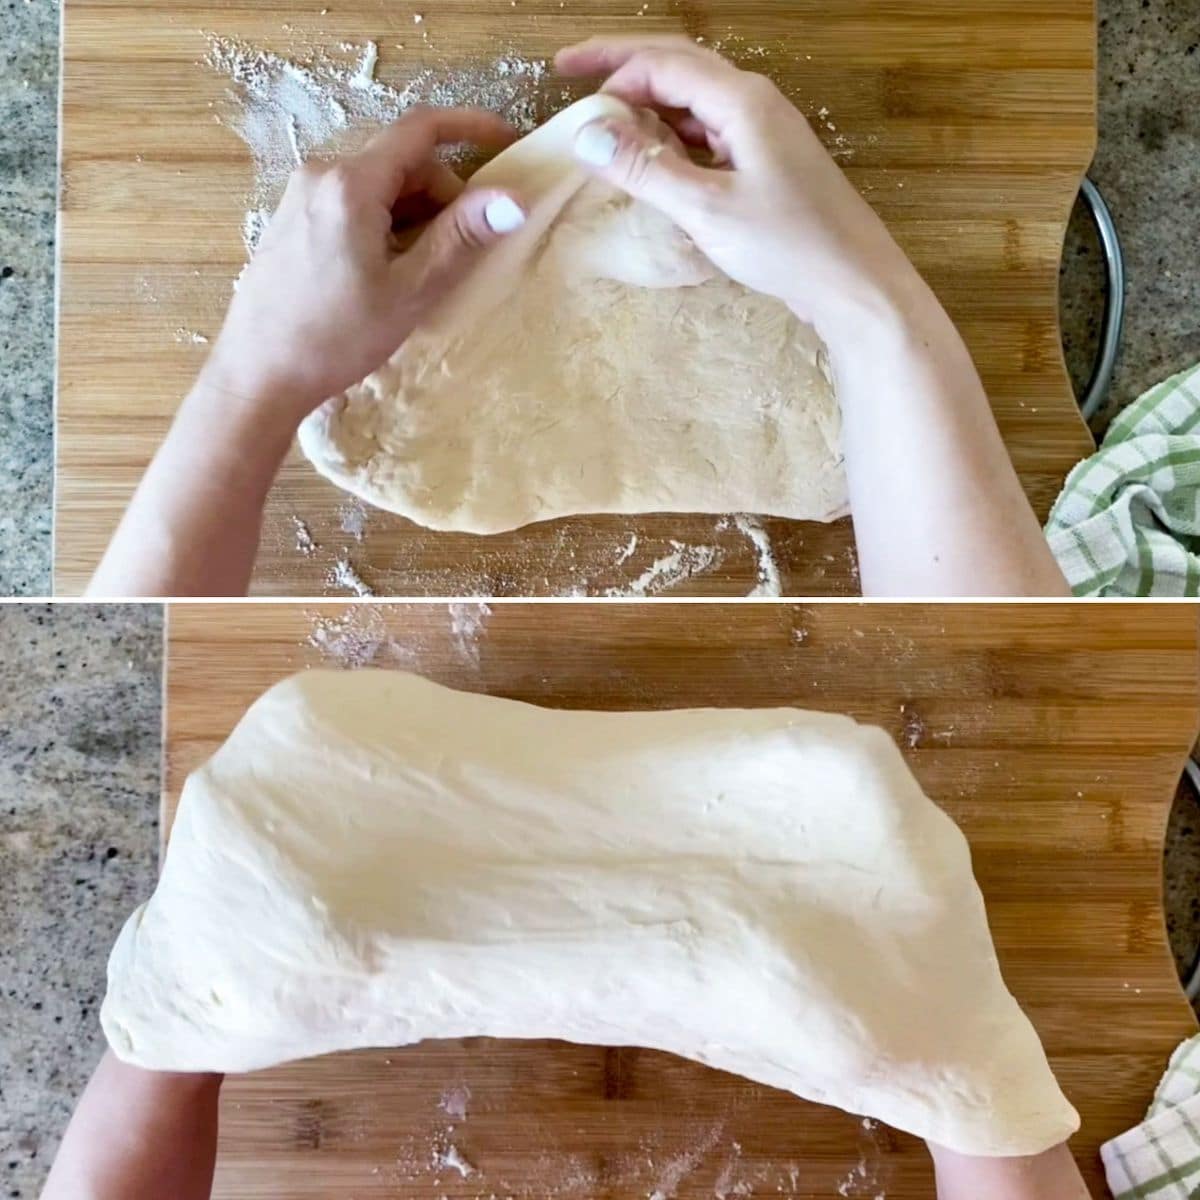 Stretching Pizza Dough By Hand